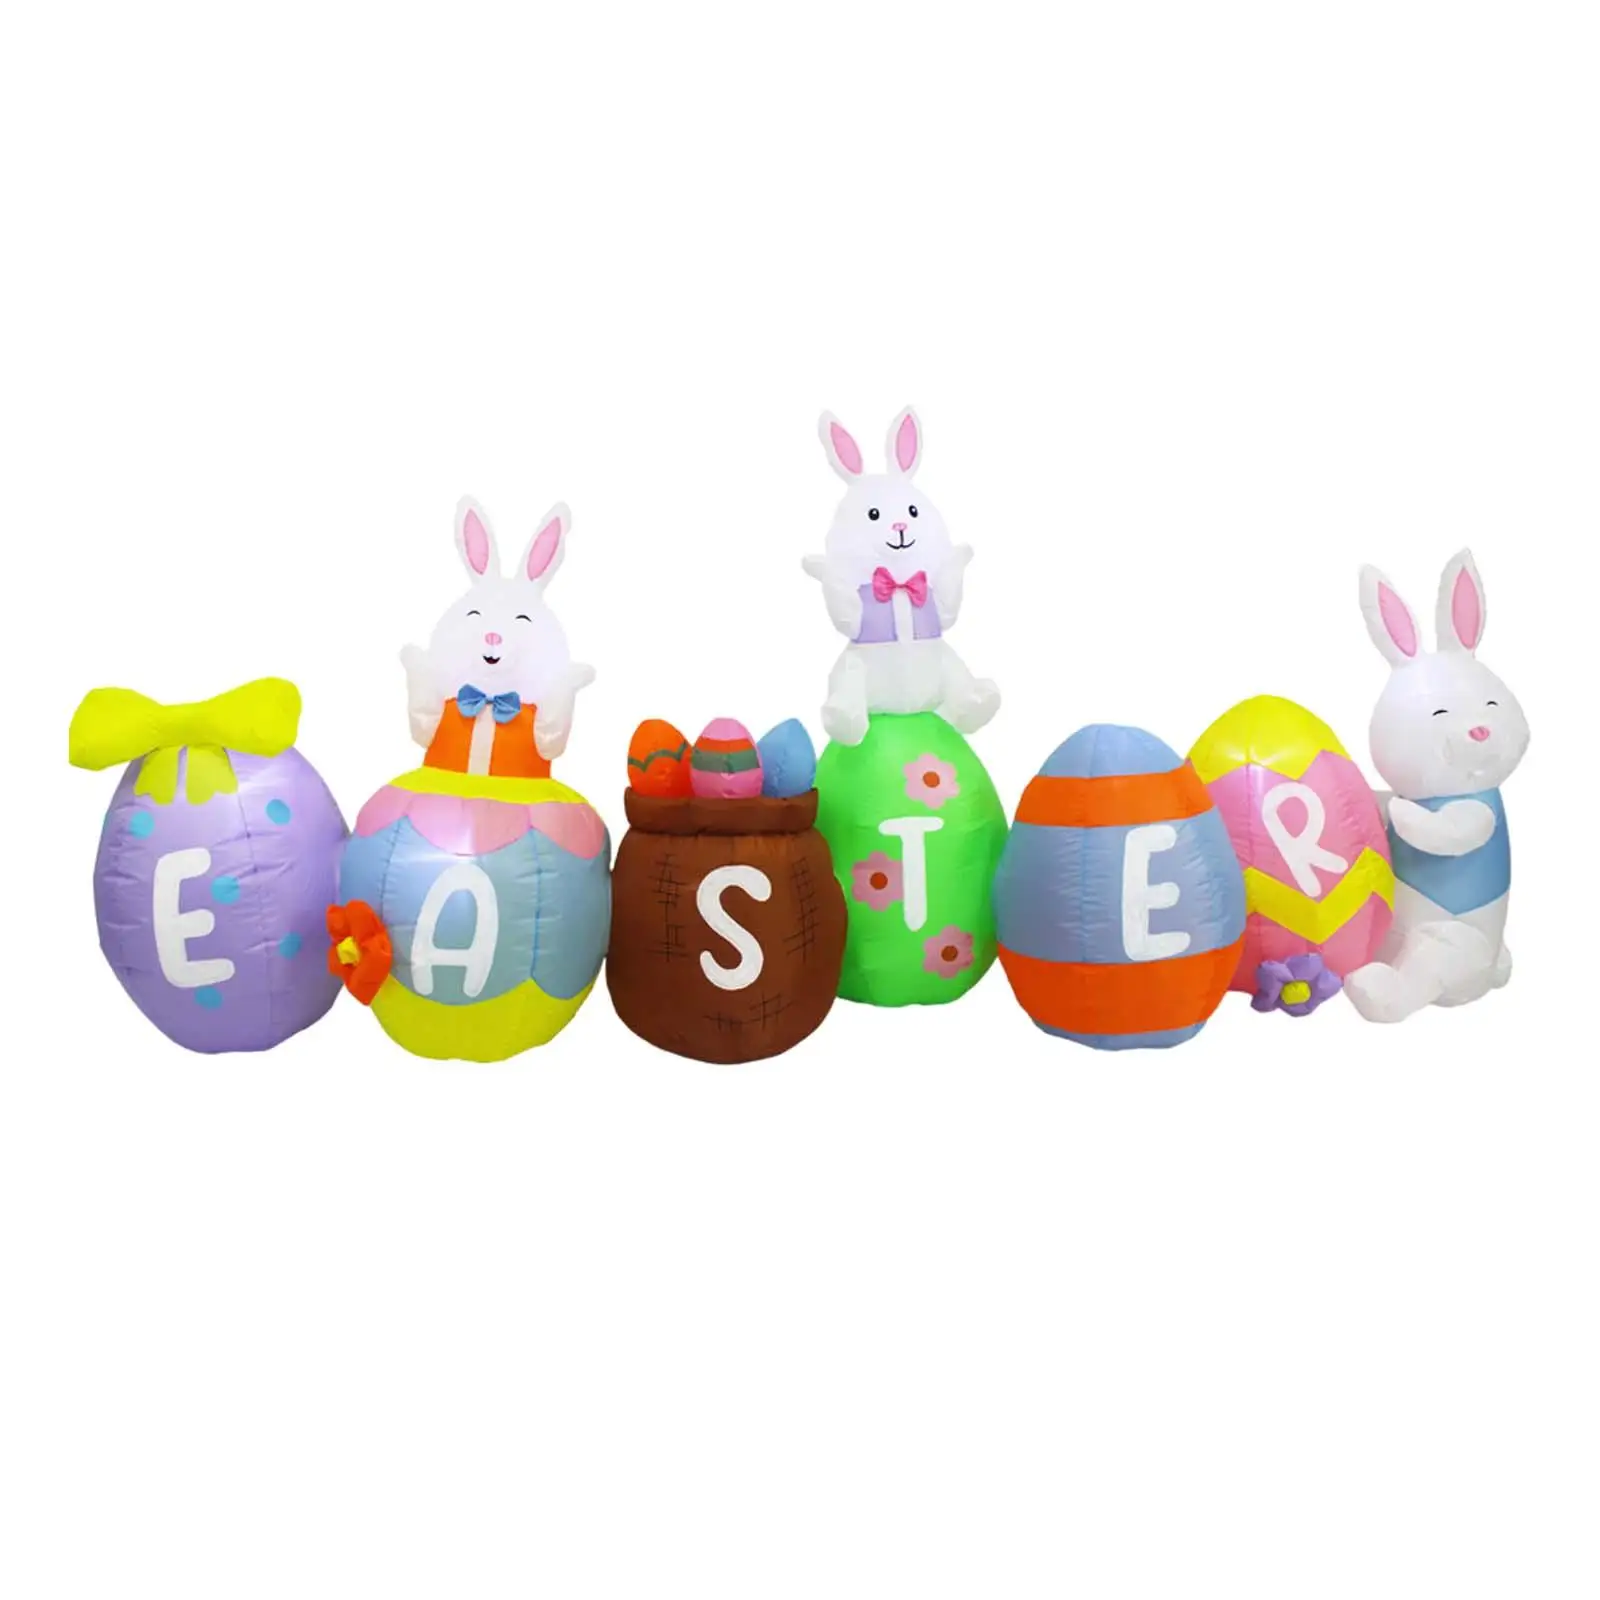 10ft Easter Inflatables Outdoor Decorations Adorable Photo Props LED Lighted Giant Happy for Wedding House Holiday Porch Garden